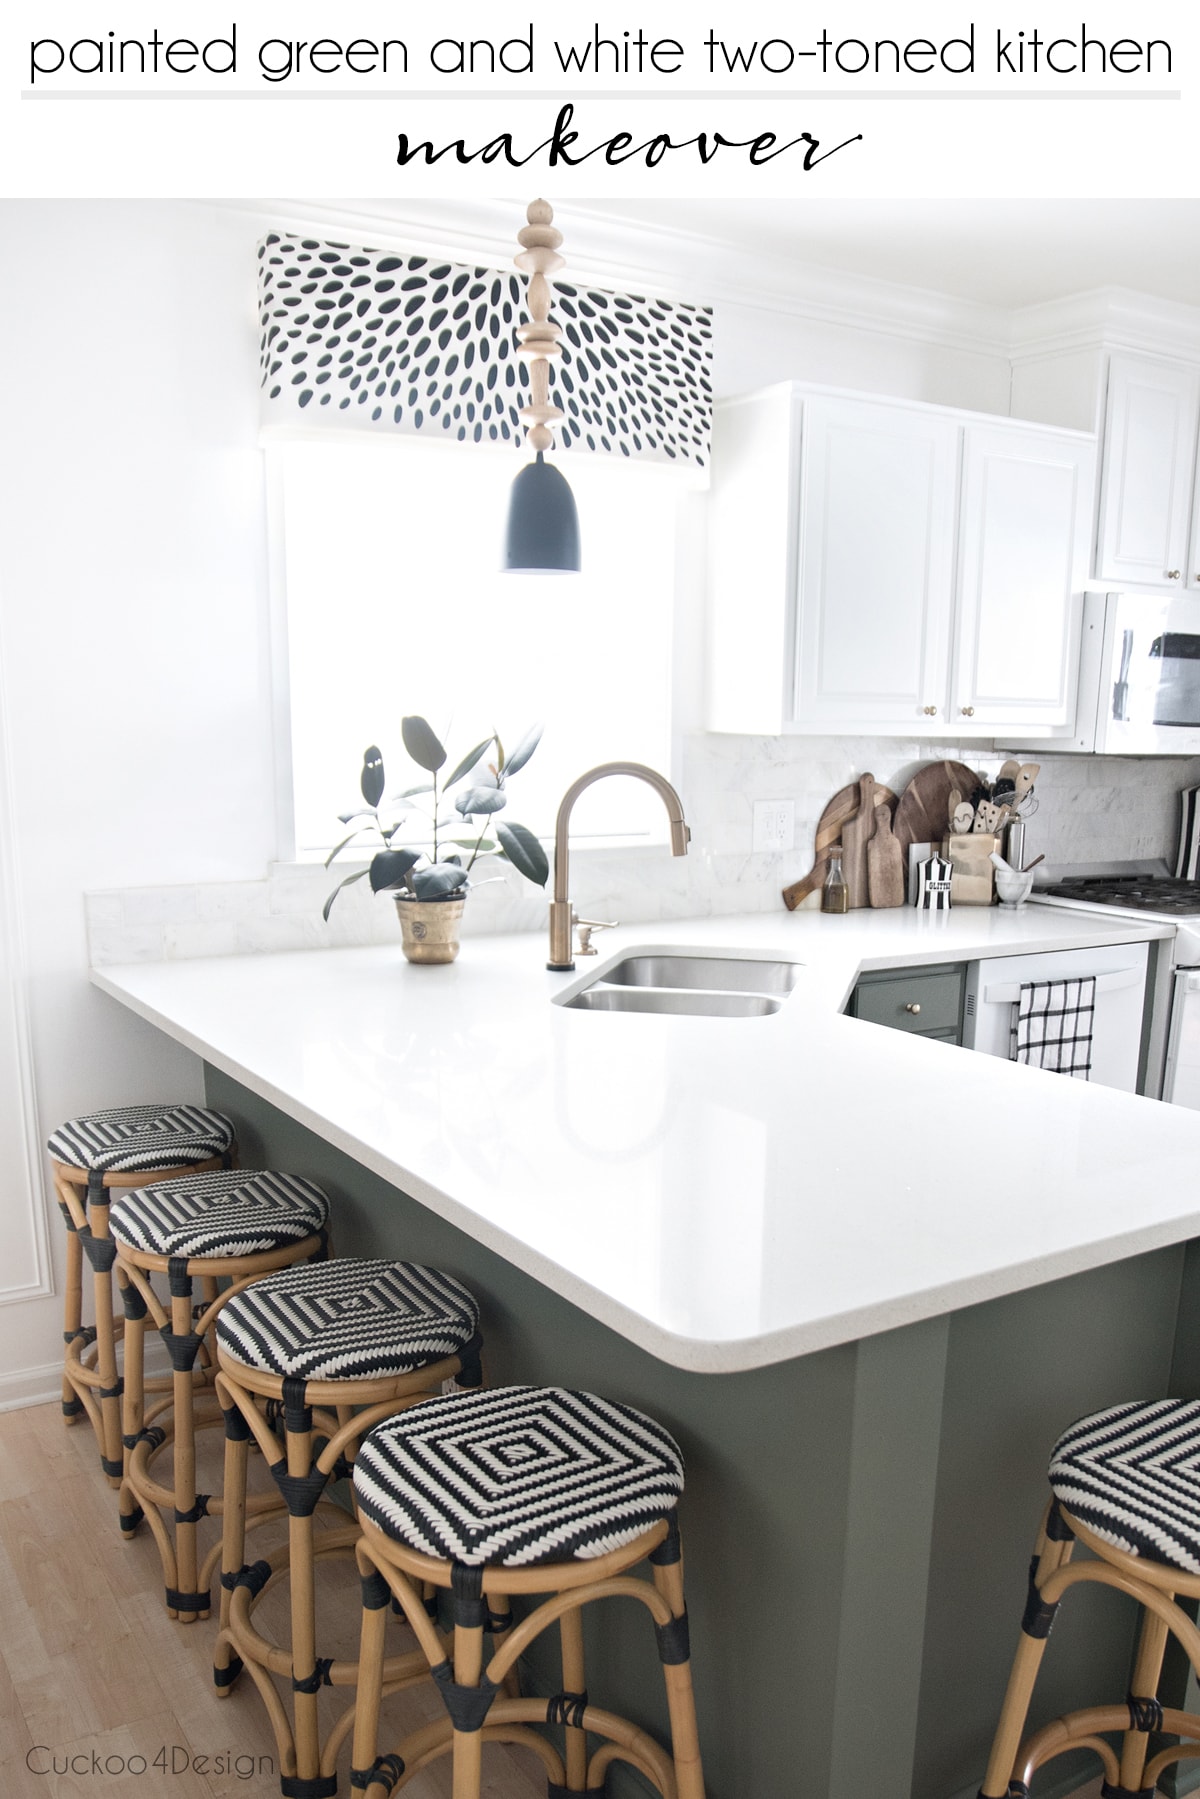 turning my white laminate builder grade kitchen into a green and white two-toned kitchen